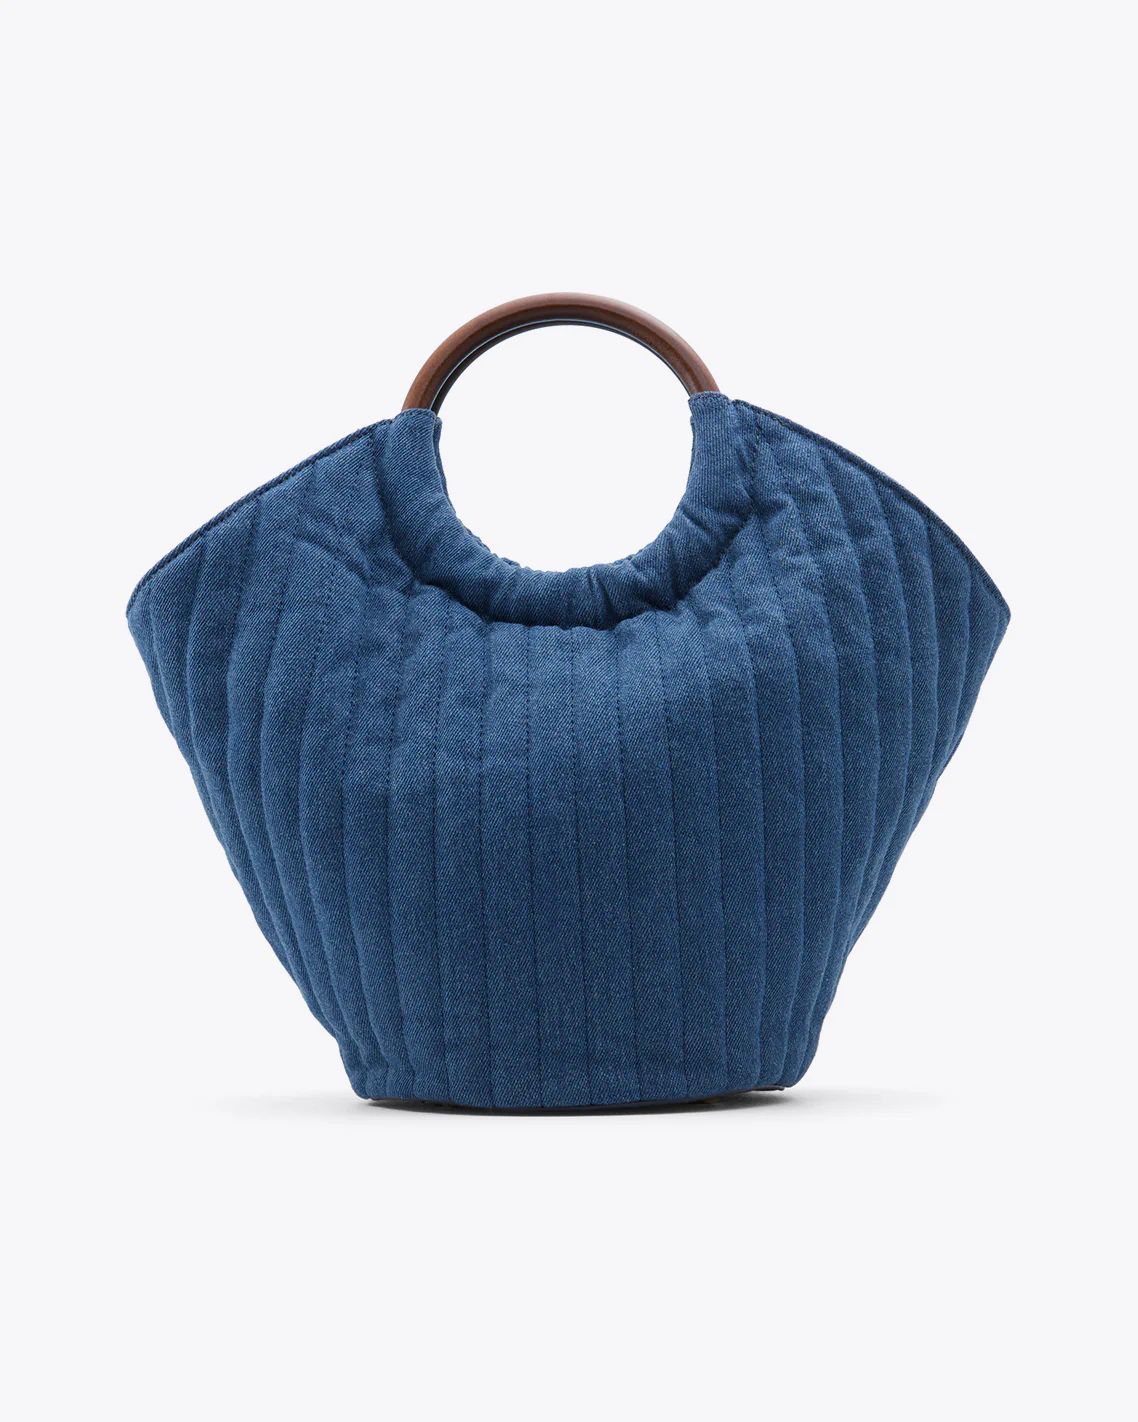 Paige Tote Bag in Chambray | Draper James (US)